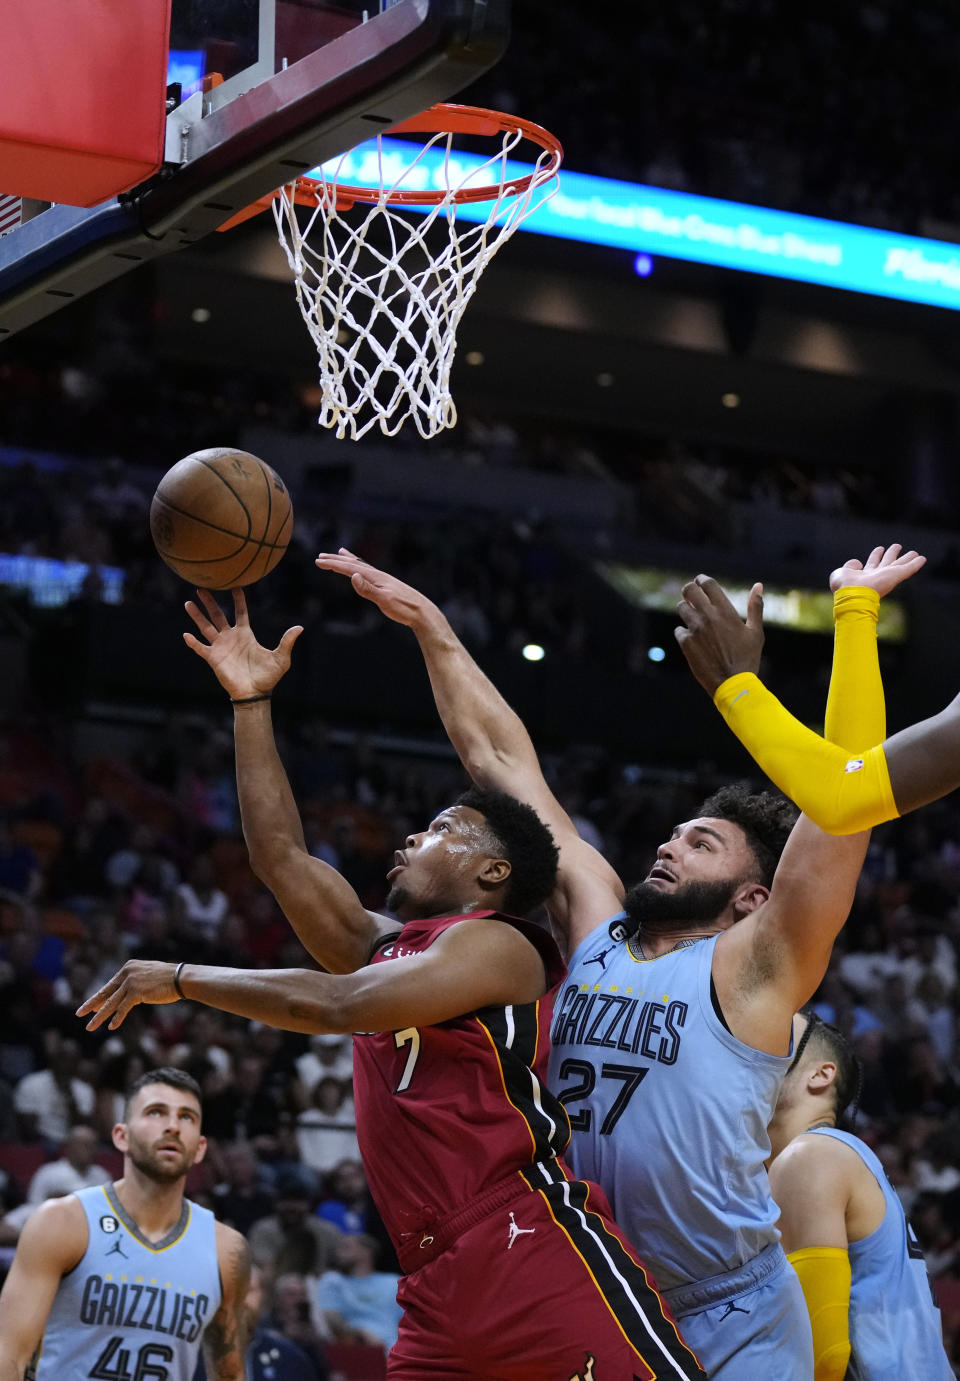 Miami Heat guard Kyle Lowry (7) shoots under pressure from Memphis Grizzlies forward David Roddy (27) during the first half of an NBA basketball game Wednesday, March 15, 2023, in Miami. (AP Photo/Rebecca Blackwell)